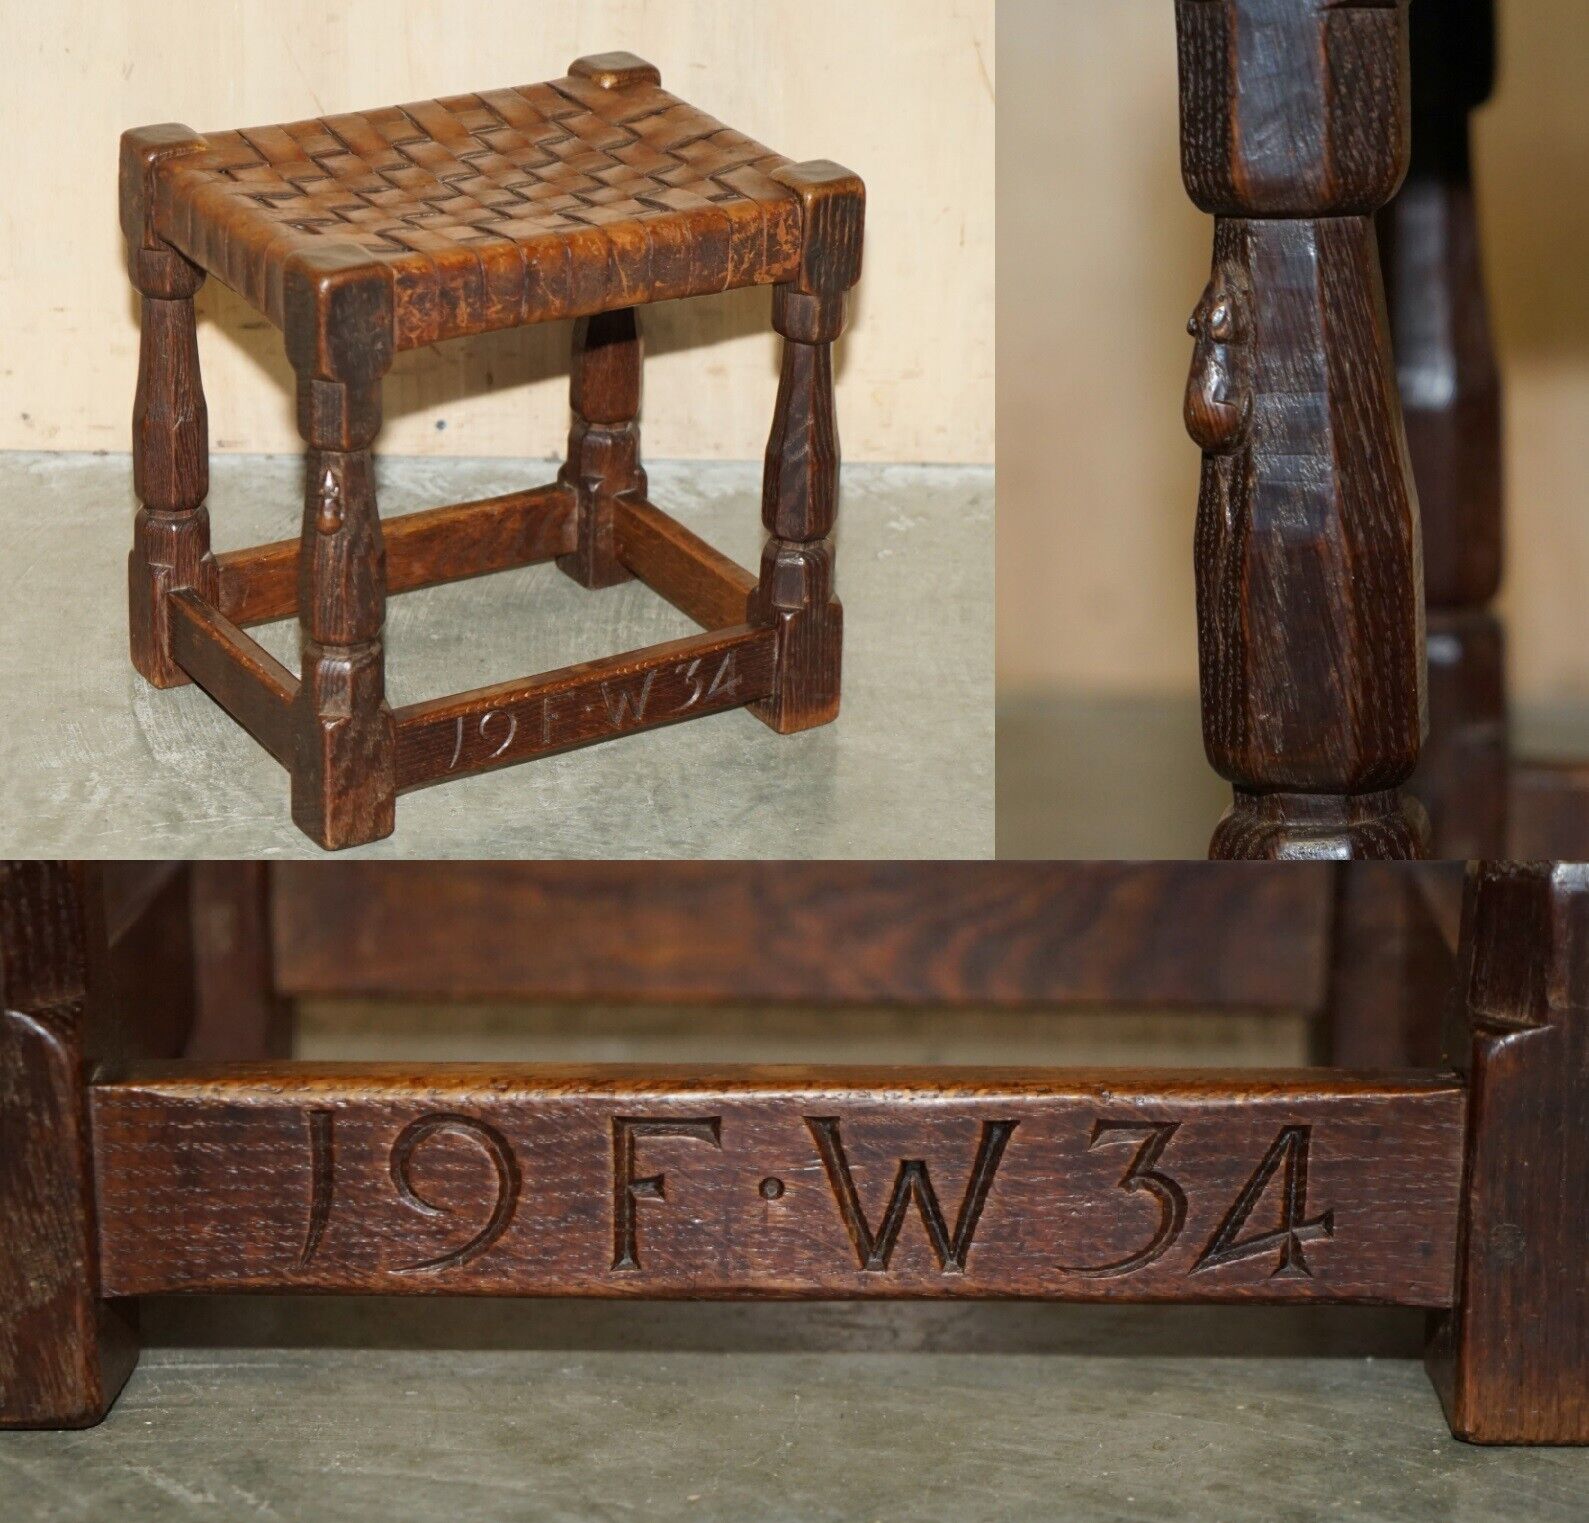 SUPER RARE 1934 DATED ROBERT MOUSEMAN THOMPSON OAK & STRAPPED LEATHER FOOTSTOOL